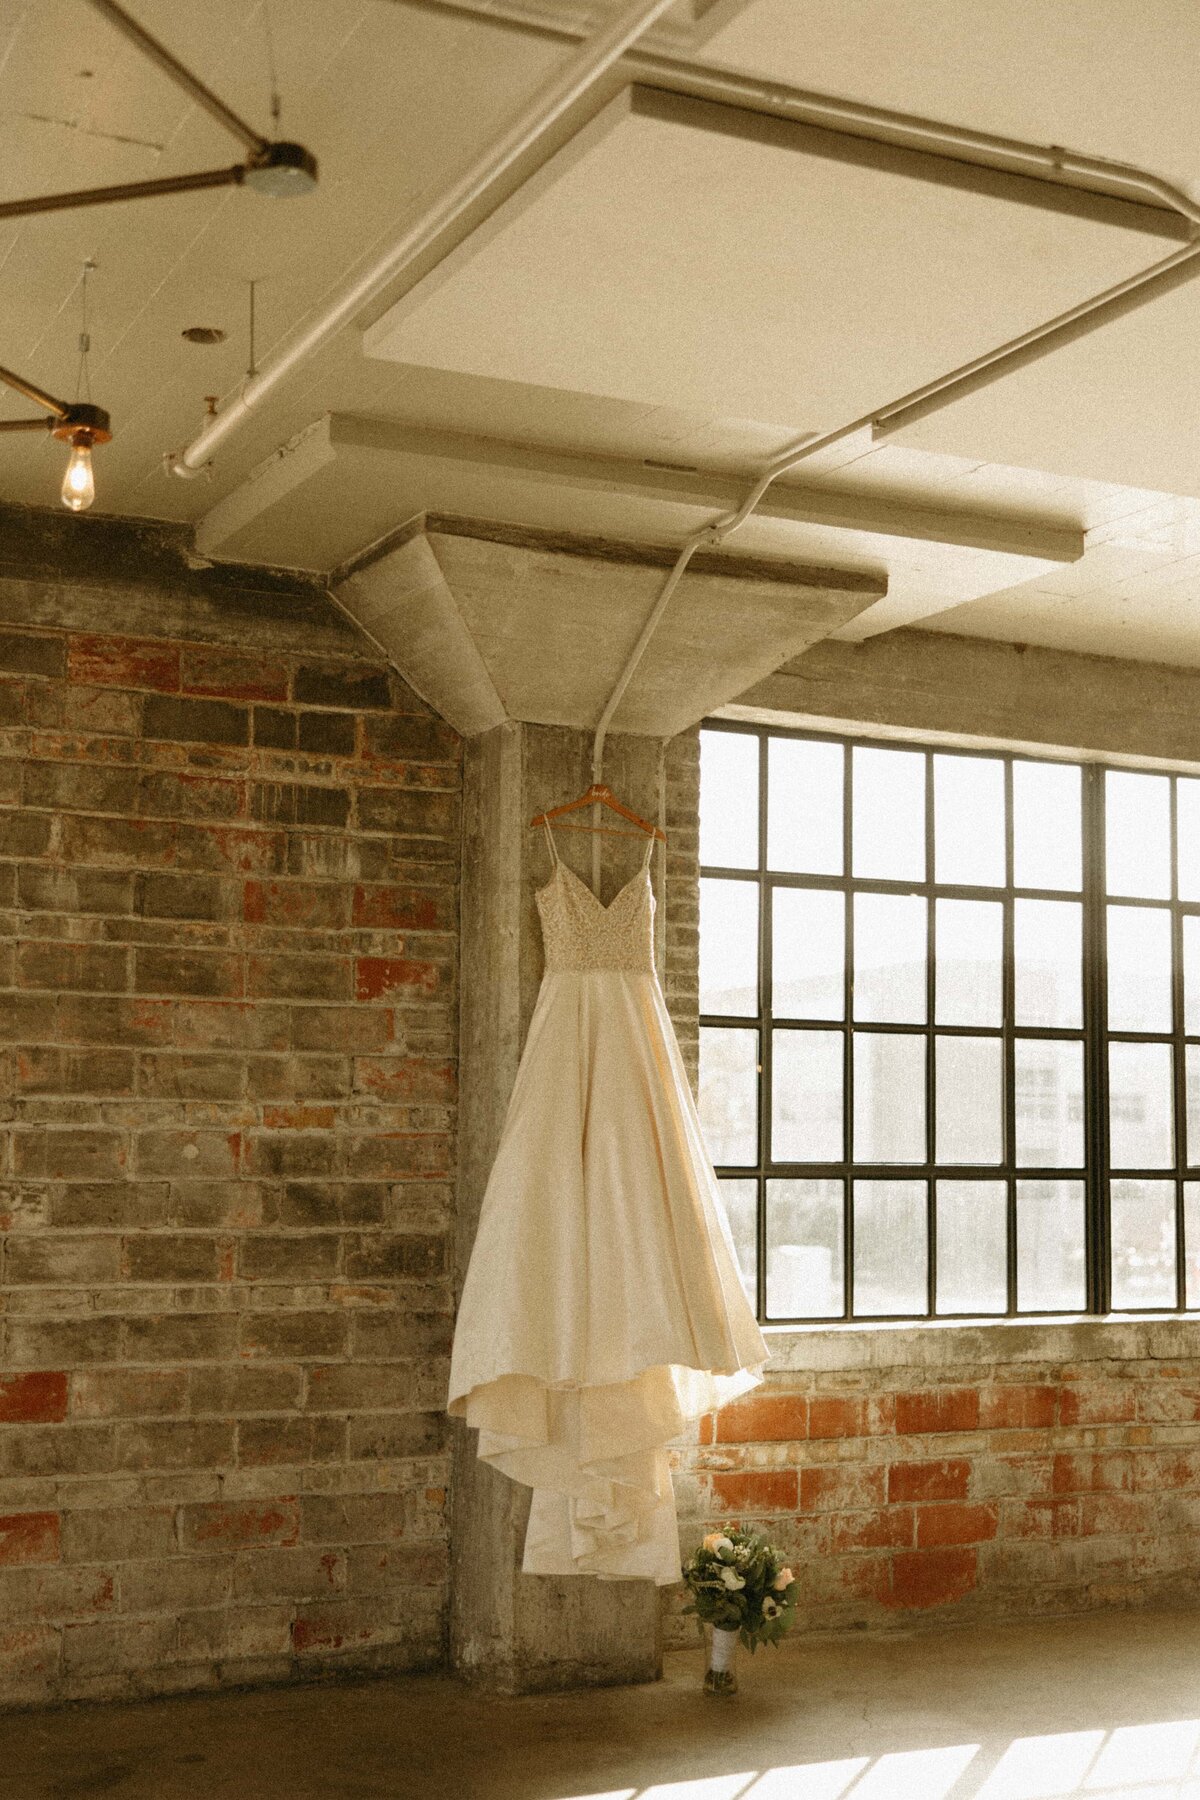 A wedding dress hangs from a beam in a loft with brick walls and a large window, bathed in natural light, perfect for Iowa weddings.